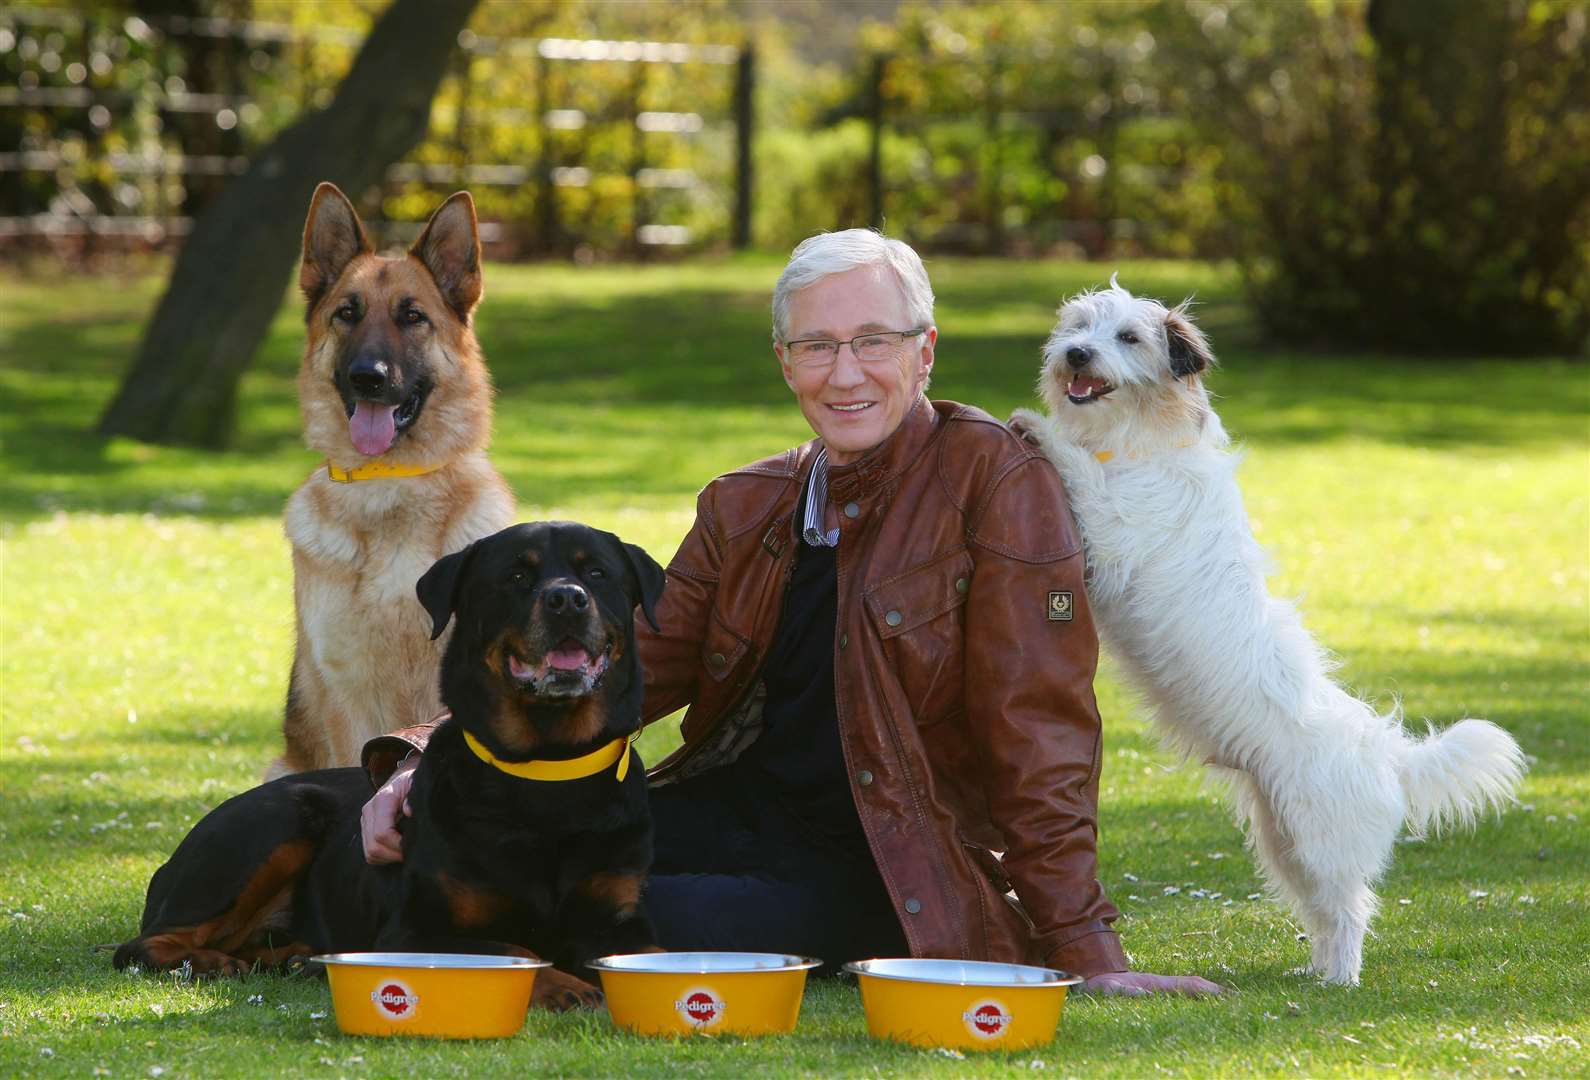 Paul O’Grady was known for his love of animals (Geoff Caddick/PA)